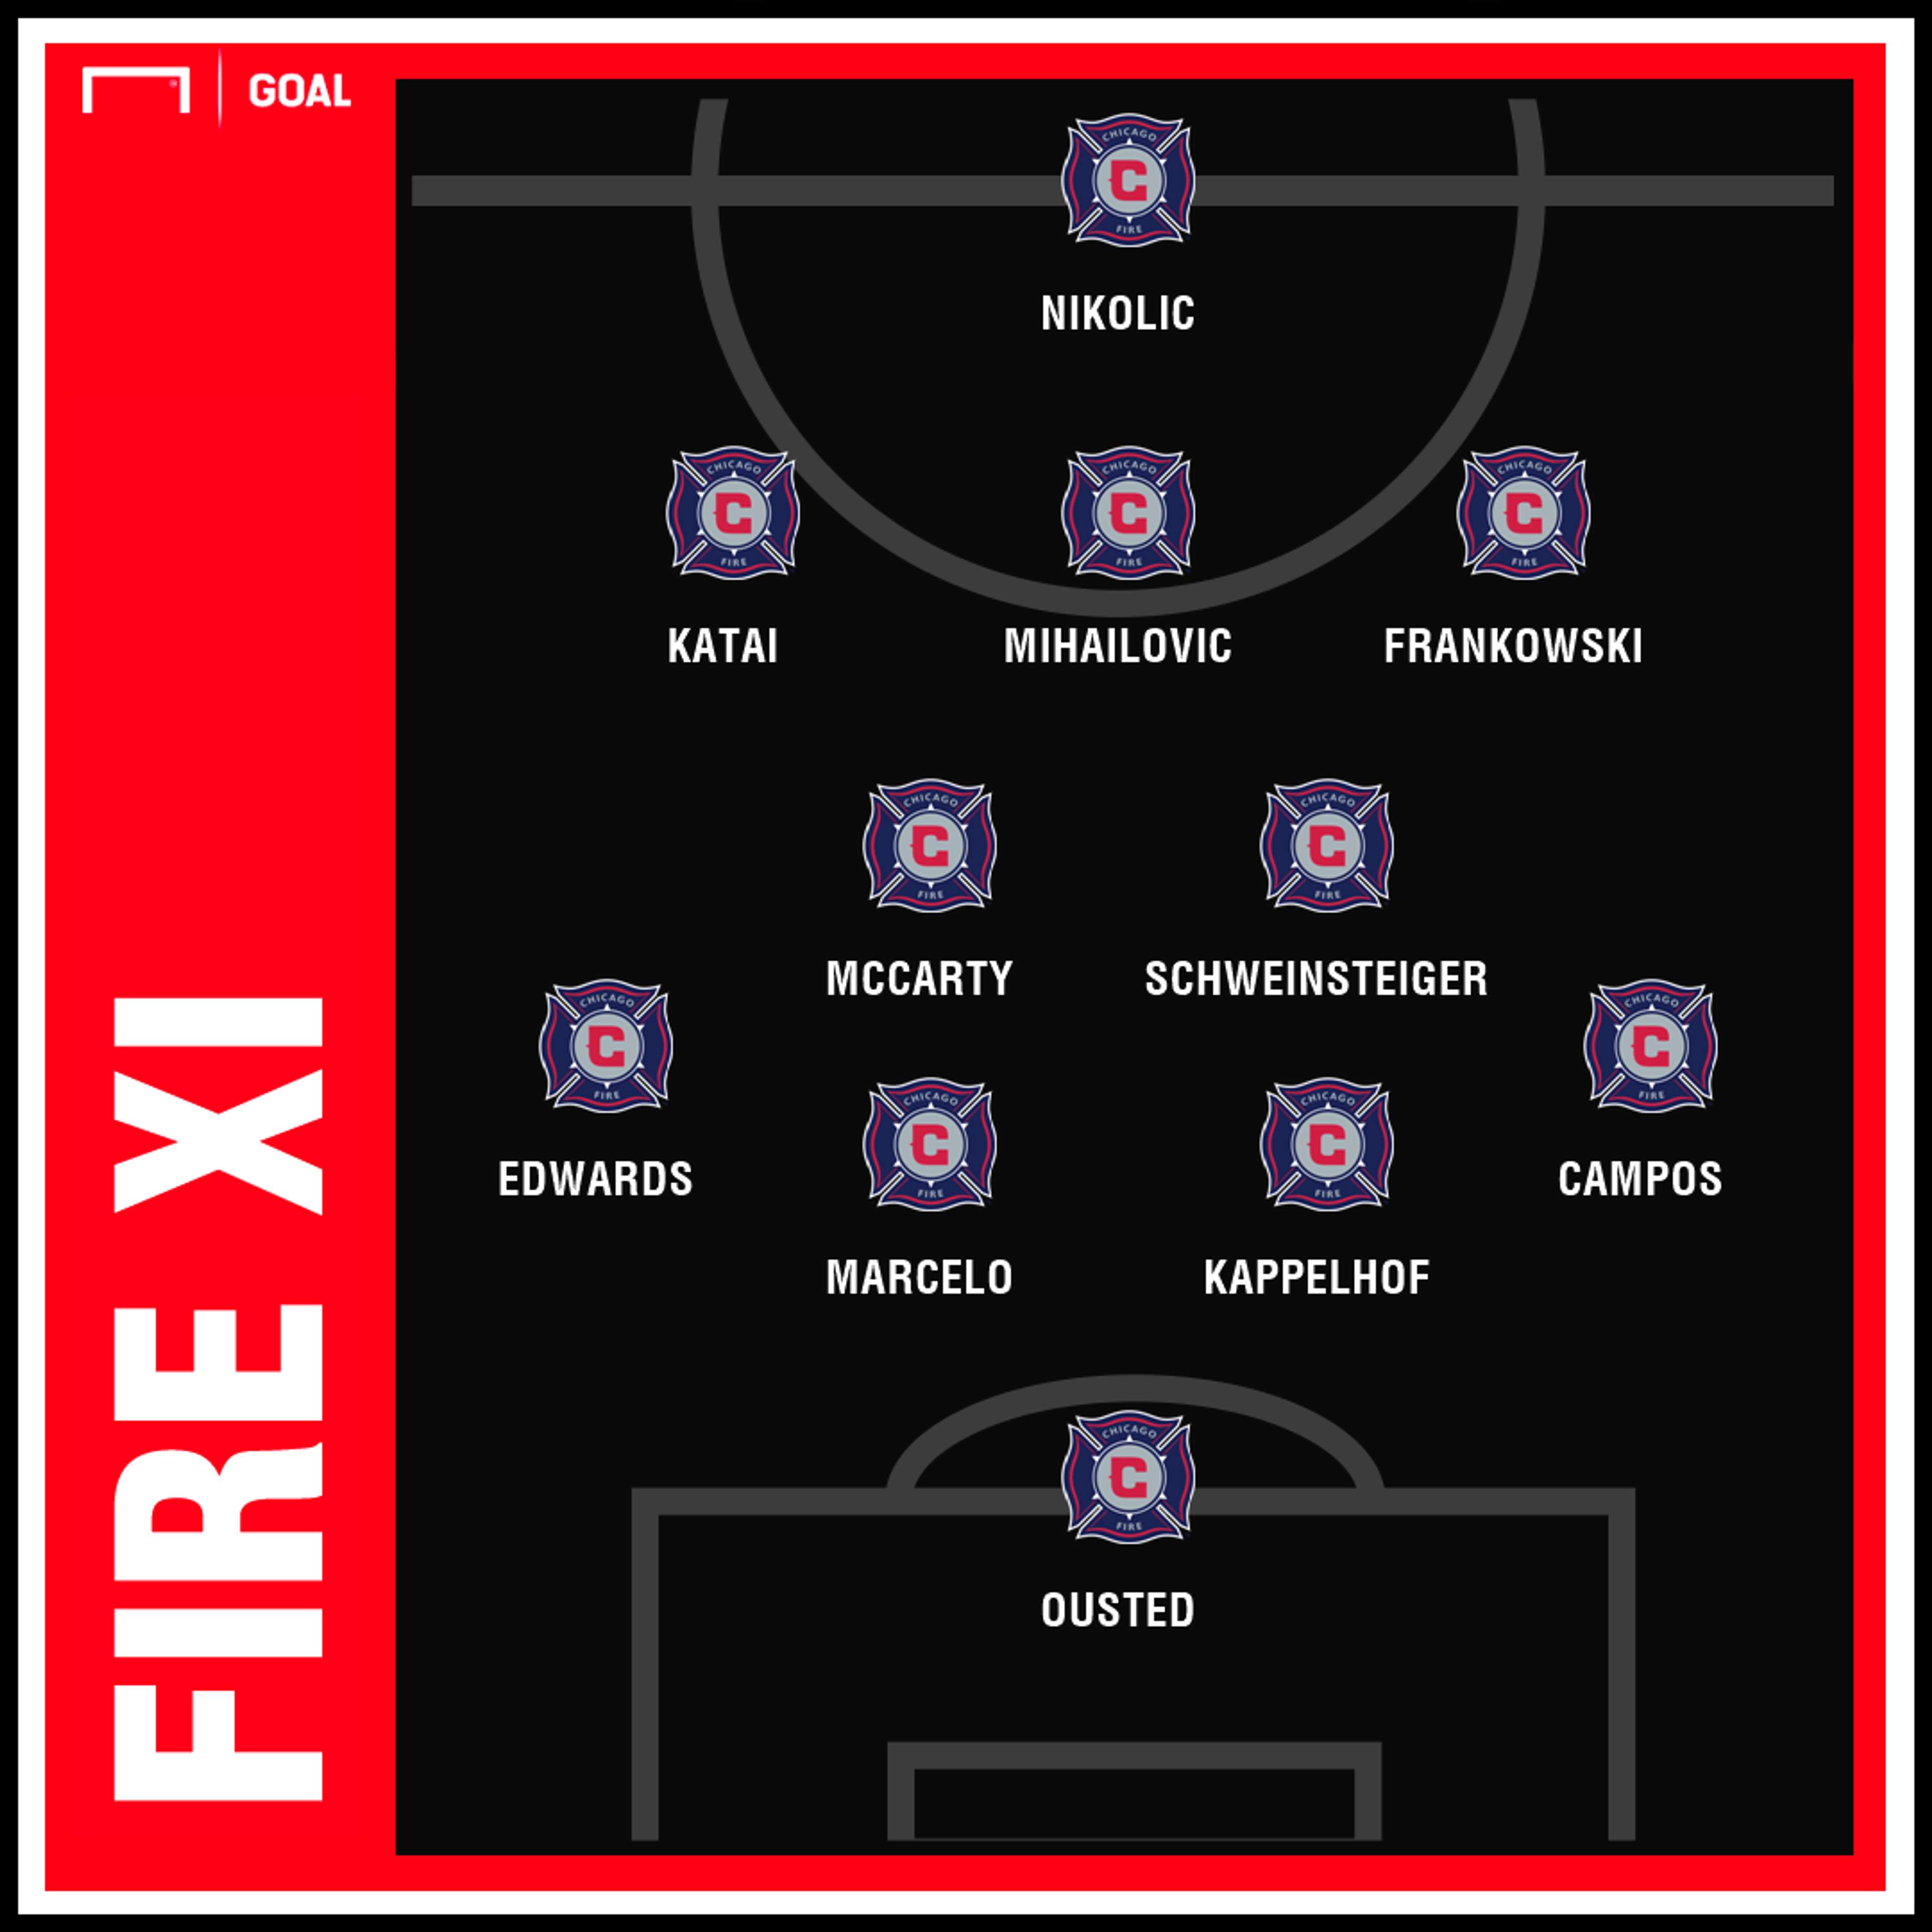 Fire 2019 Projected Lineup